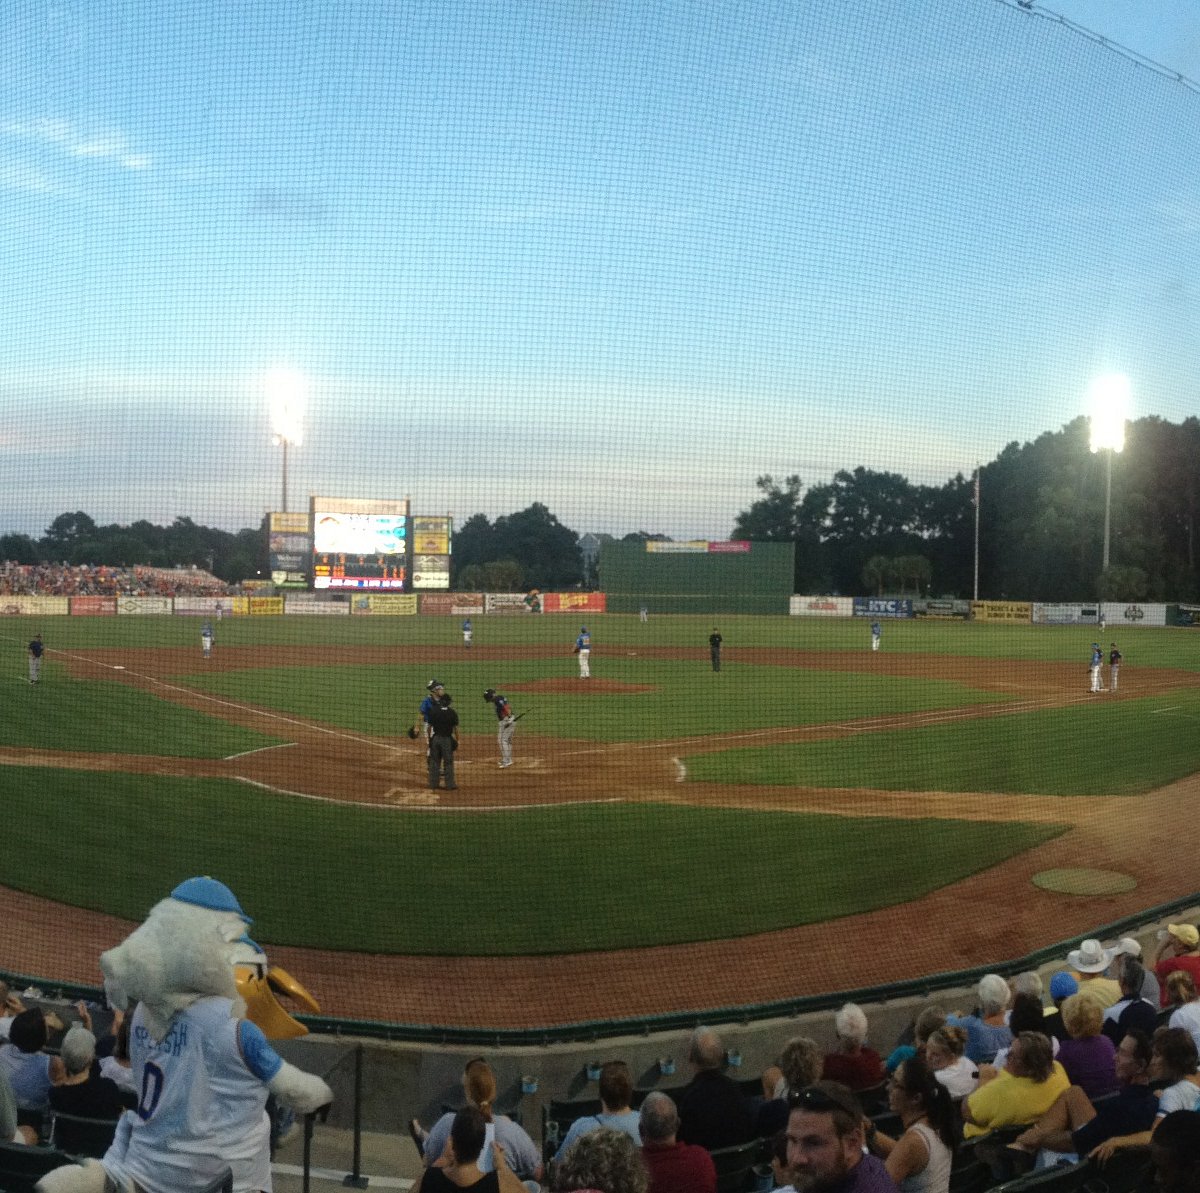 Our first Myrtle Beach Pelicans experience! From home runs to